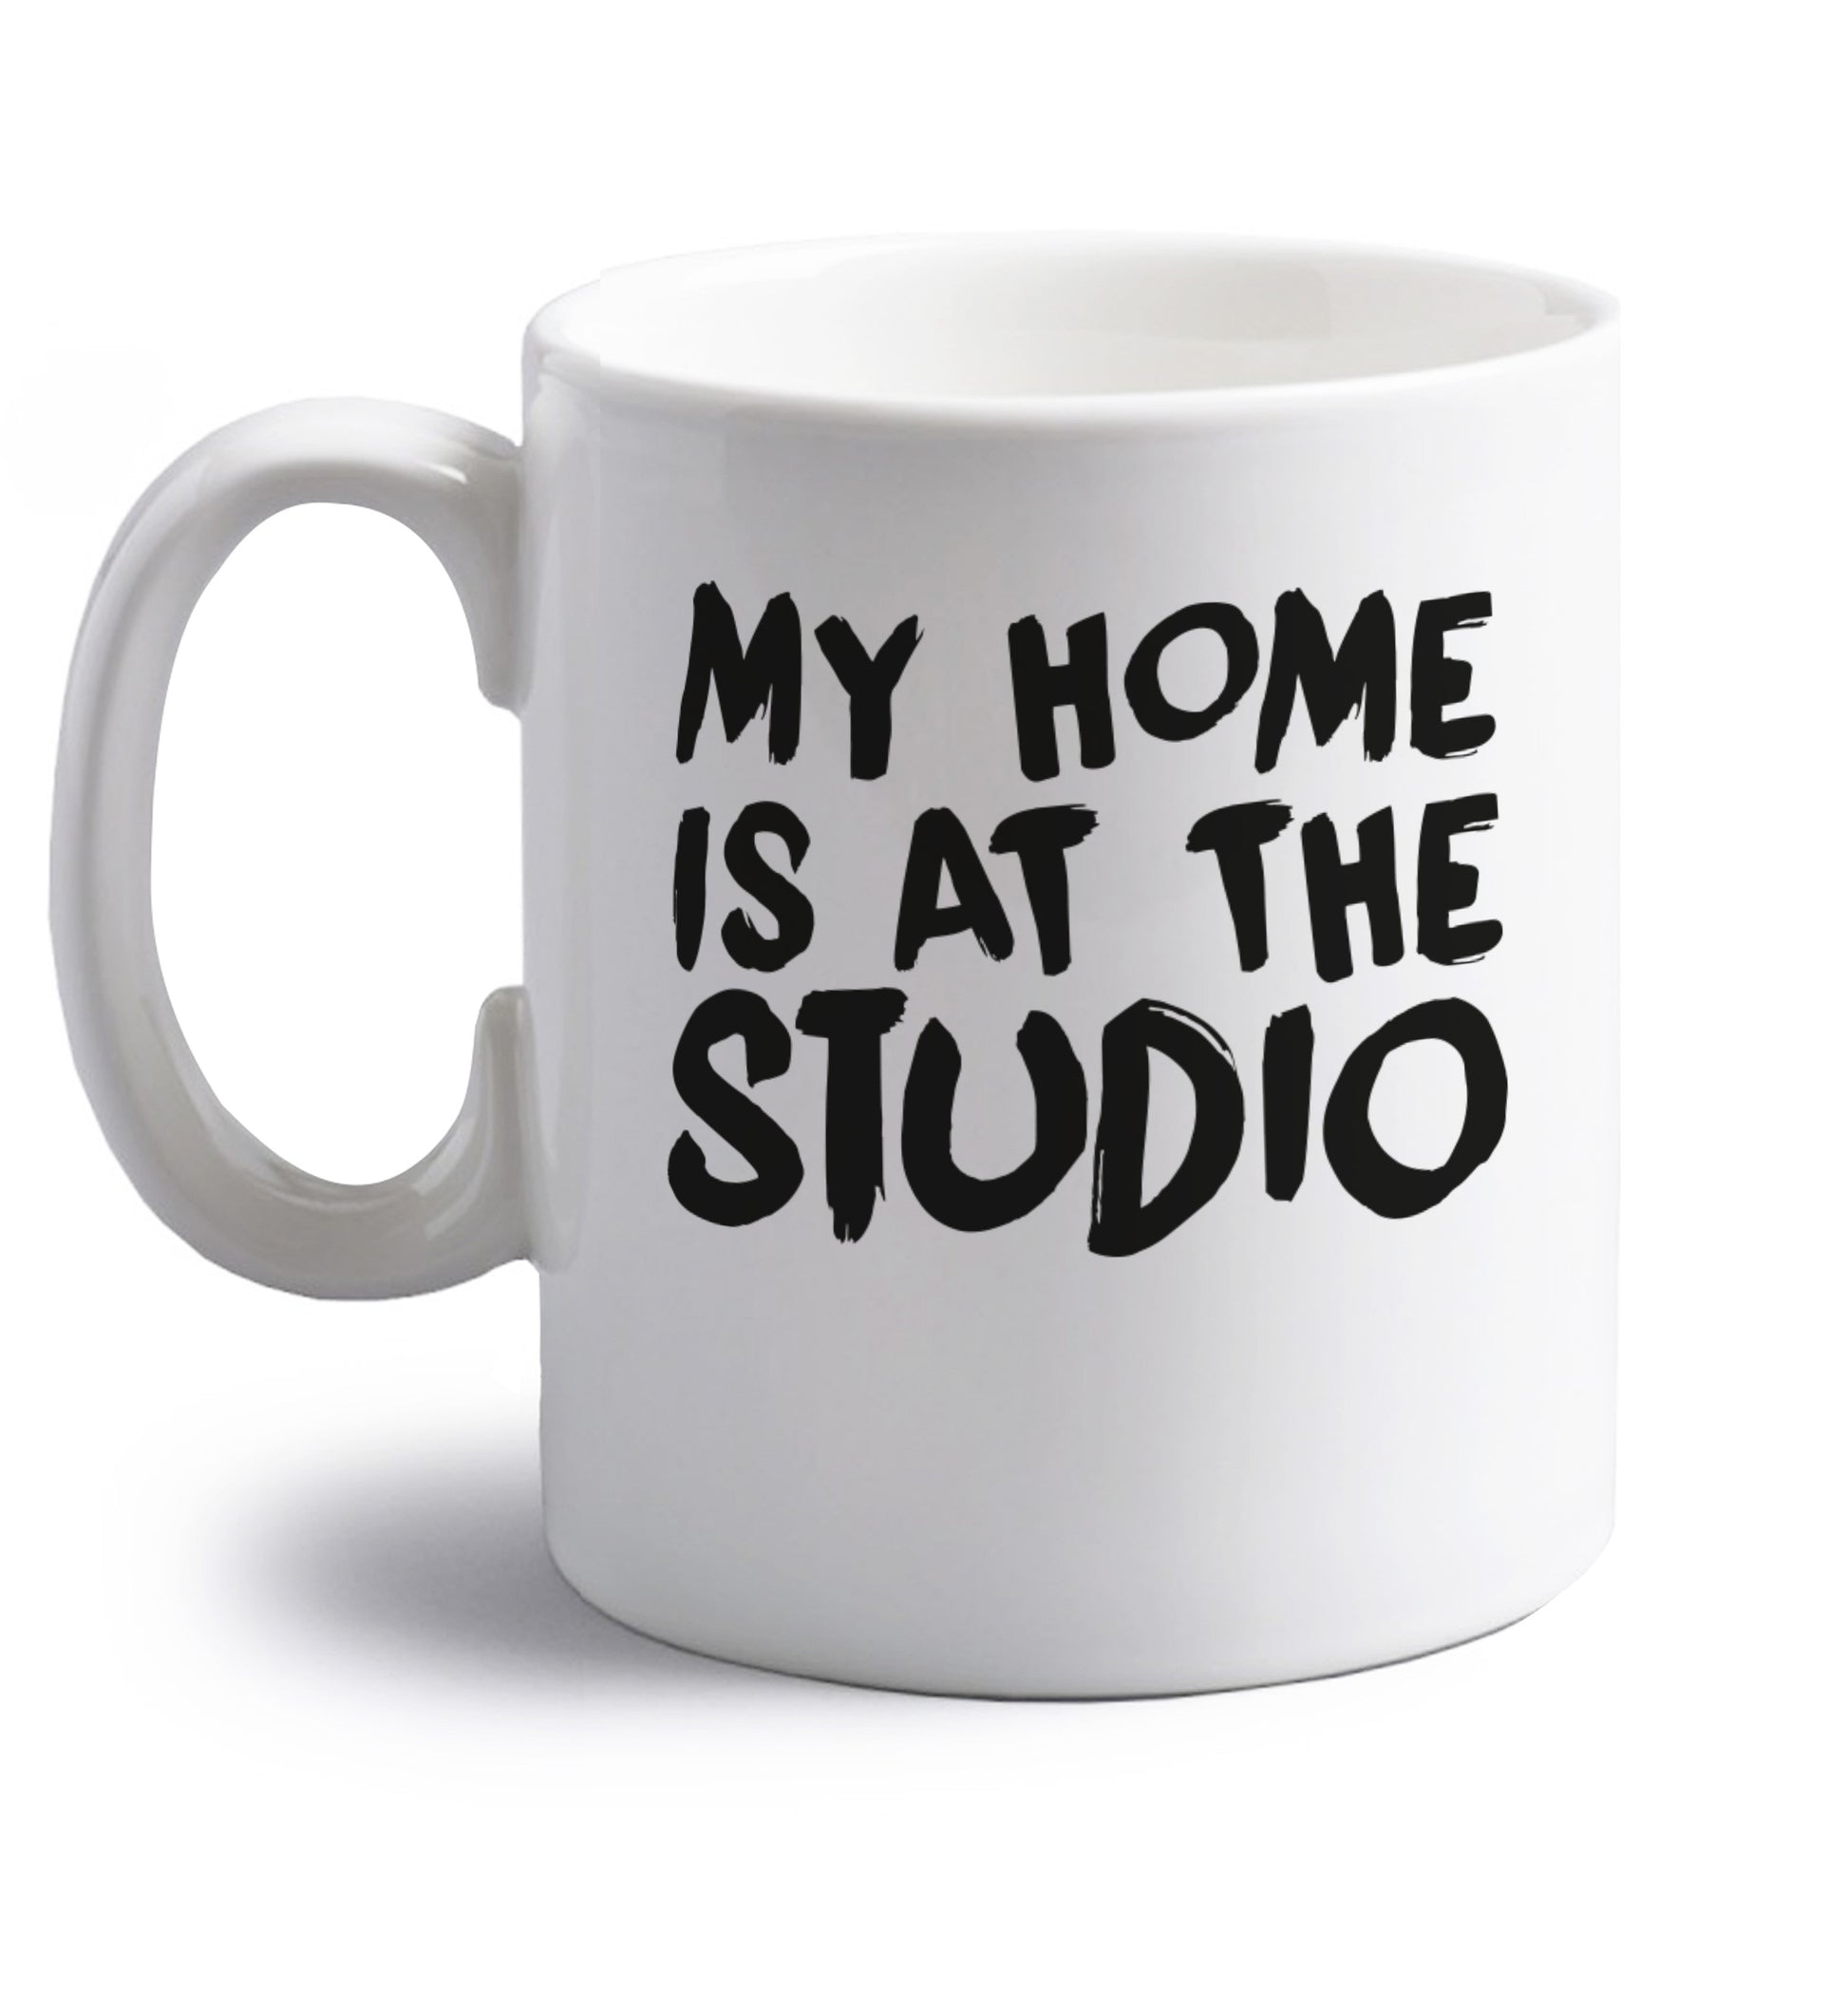 My home is at the library right handed white ceramic mug 